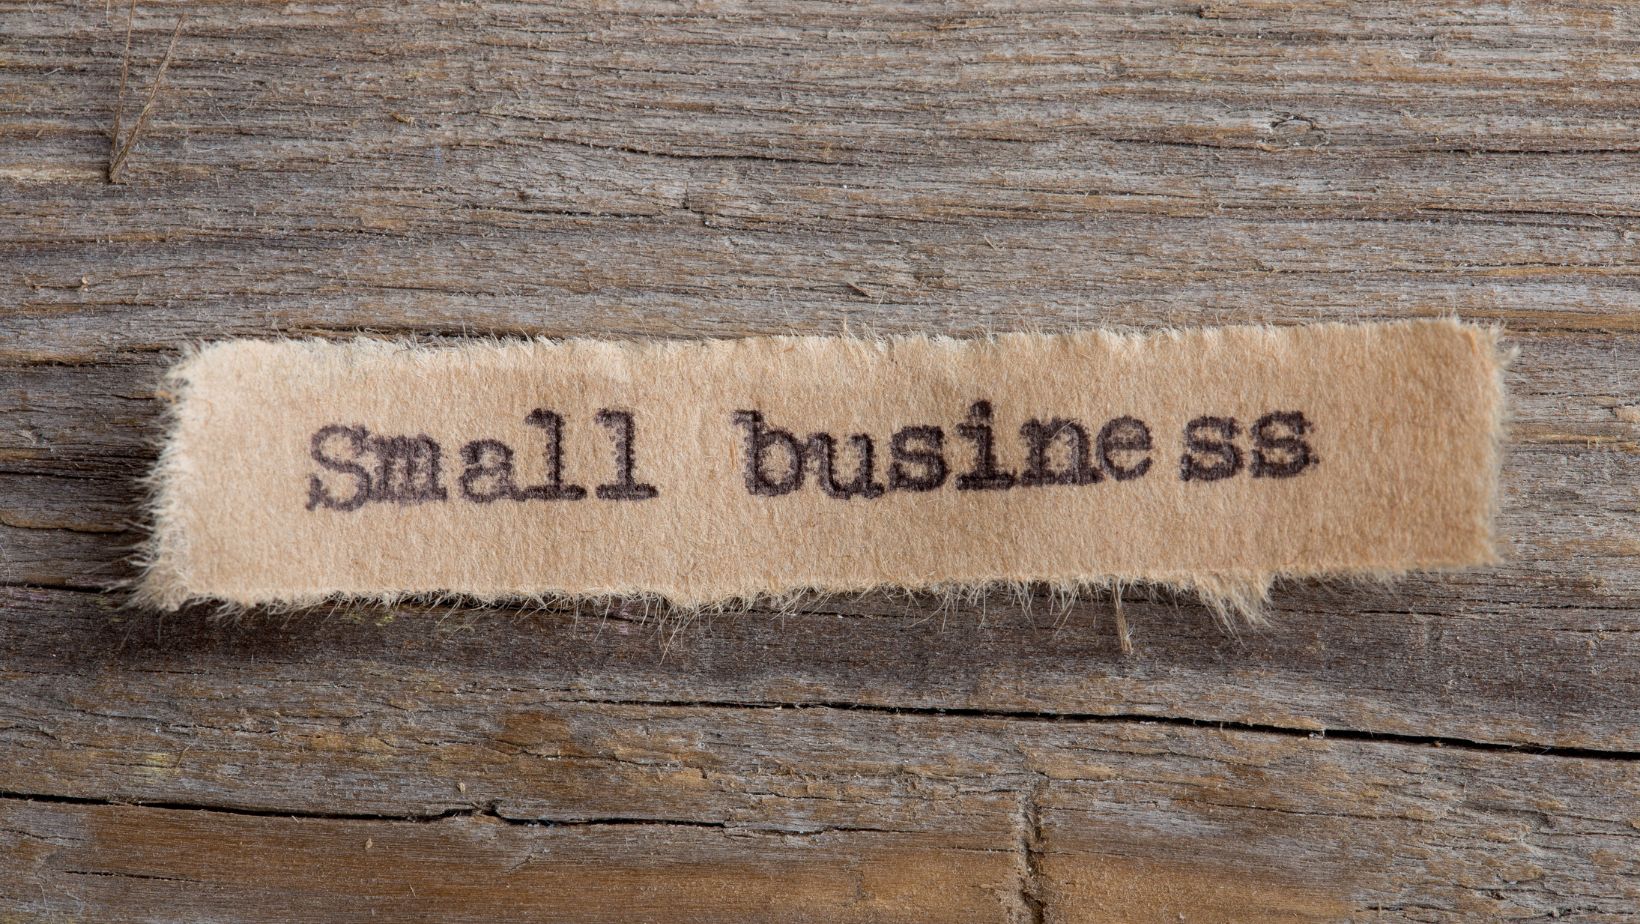 A piece of paper with the text "Small Business"